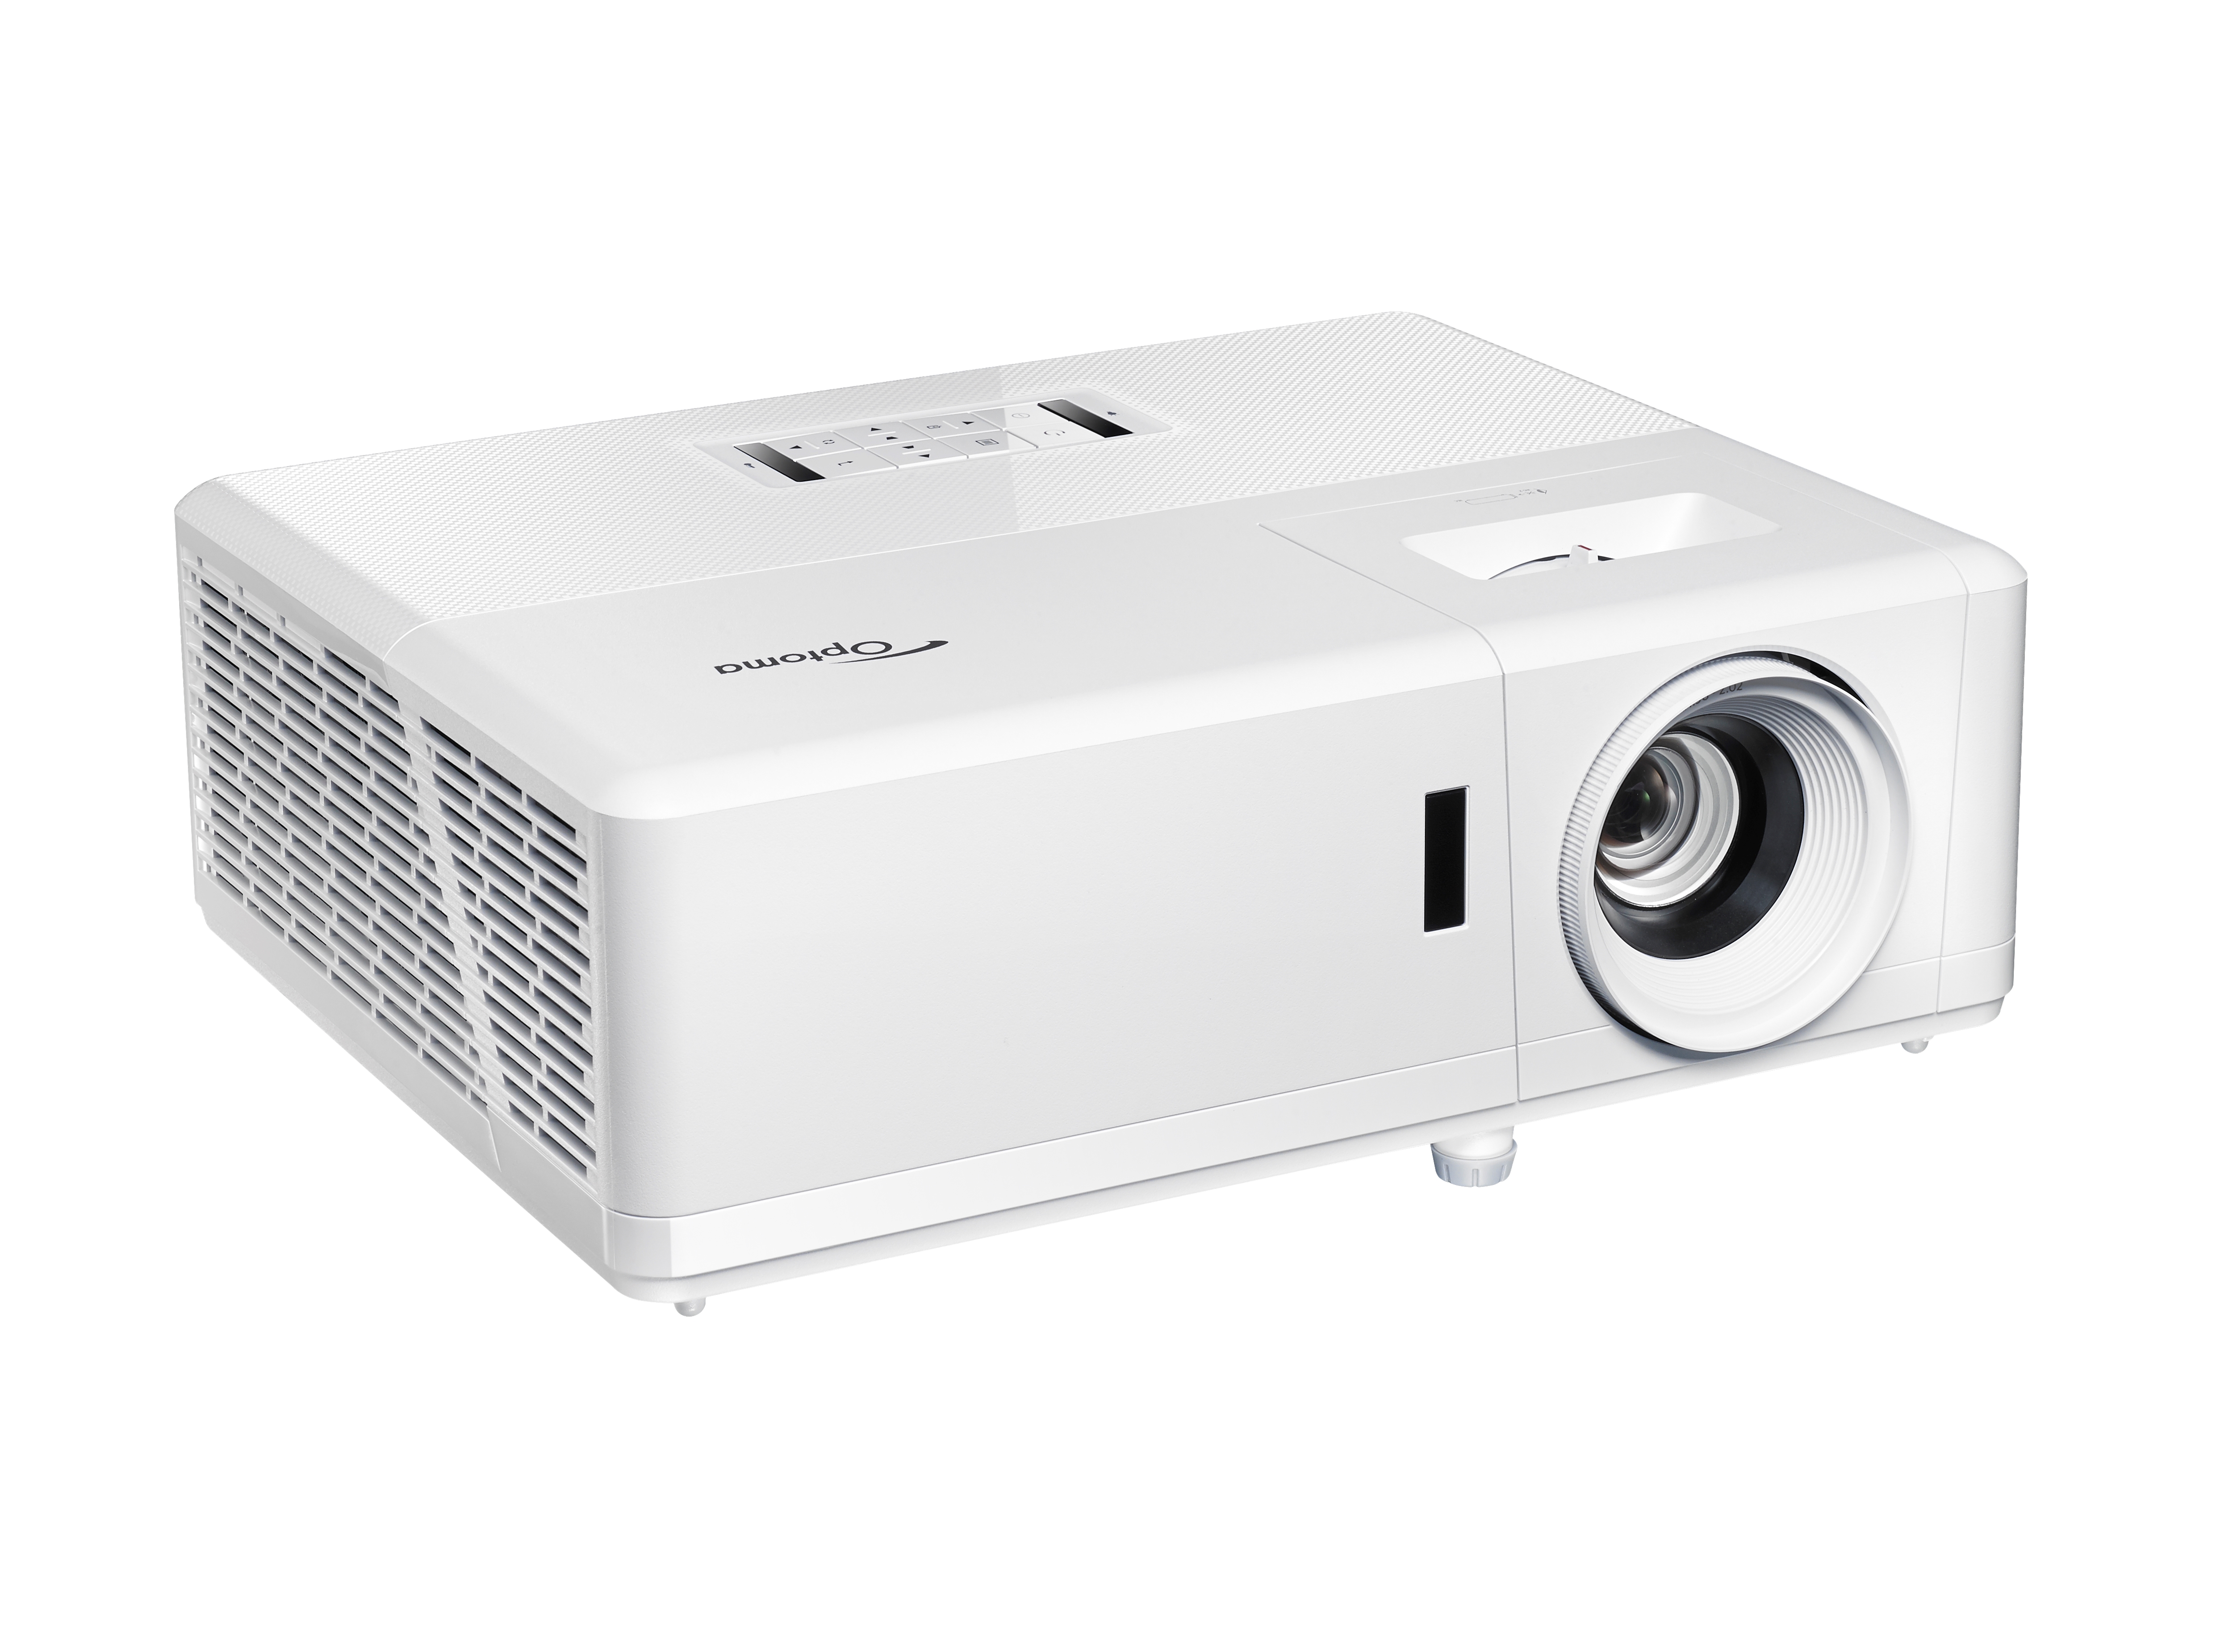 Optoma projector software download 9780547636474 pdf downl oad